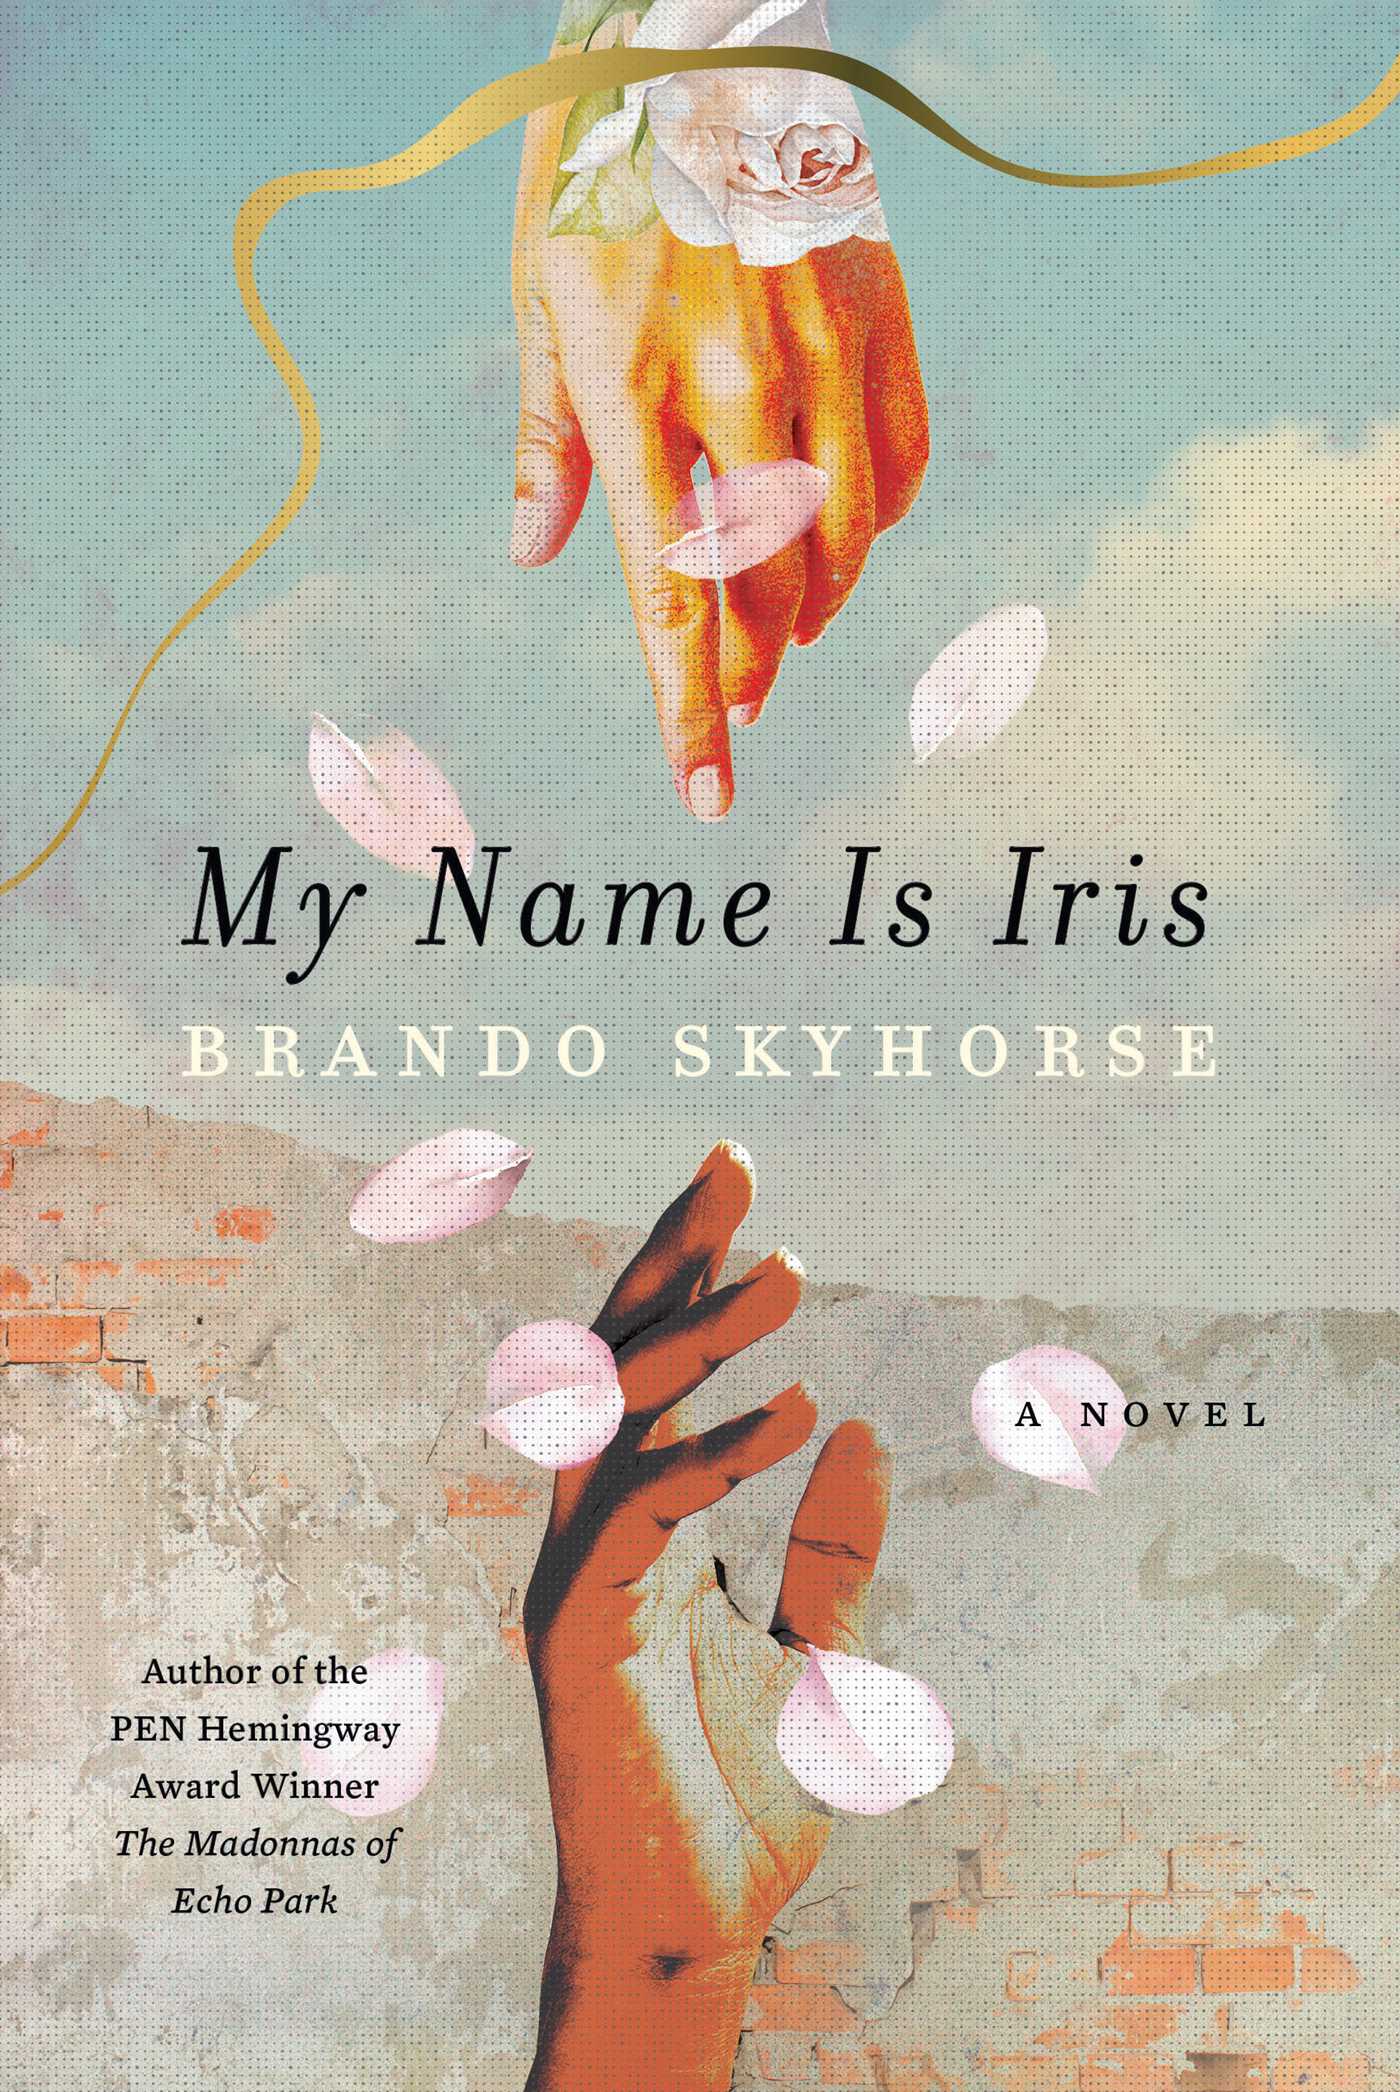 My Name Is Iris book cover